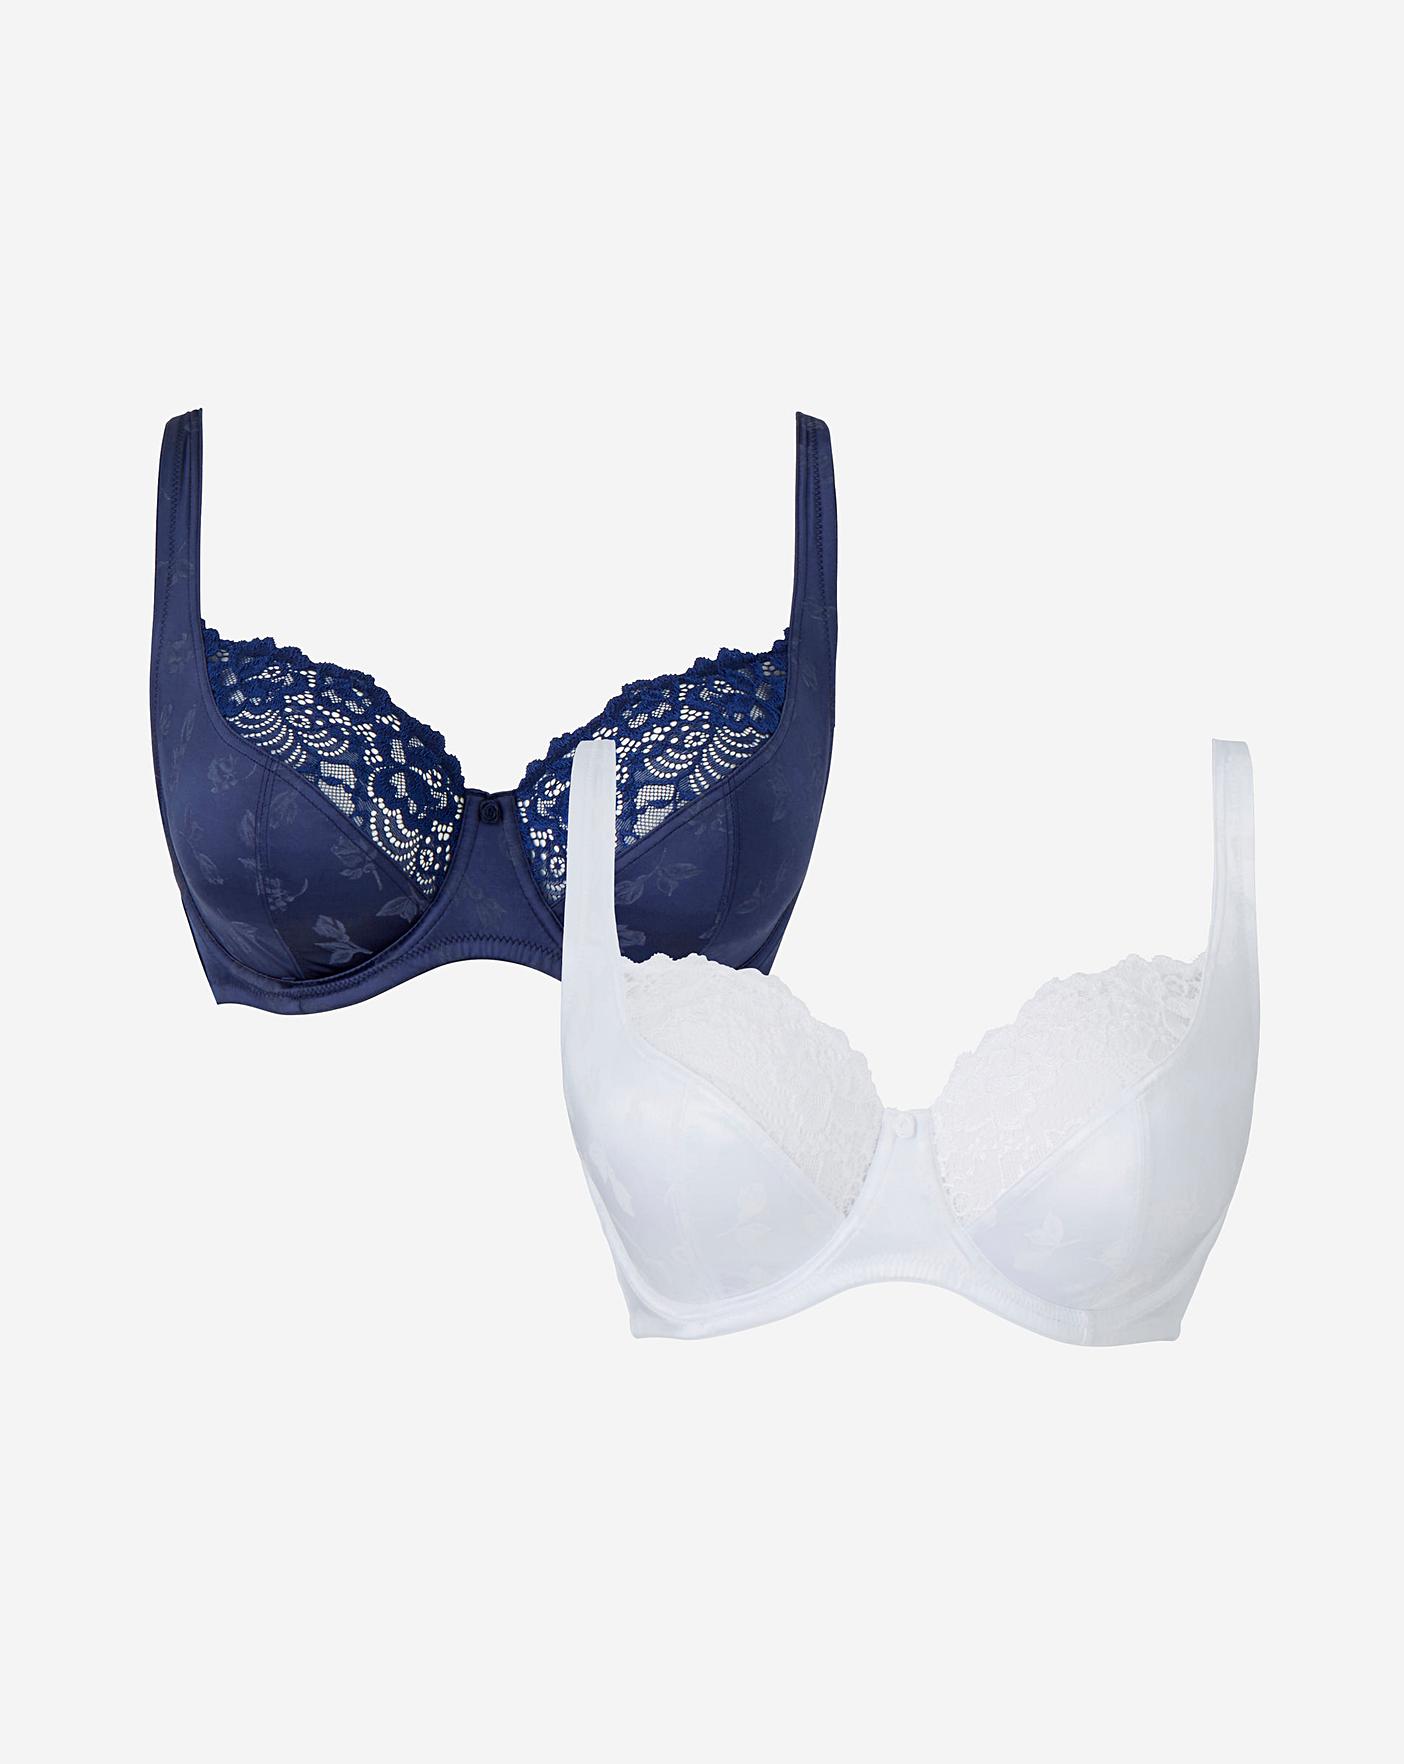 Buy Navy Blue Floral Print/Cream Non Pad Full Cup Bras 2 Pack from